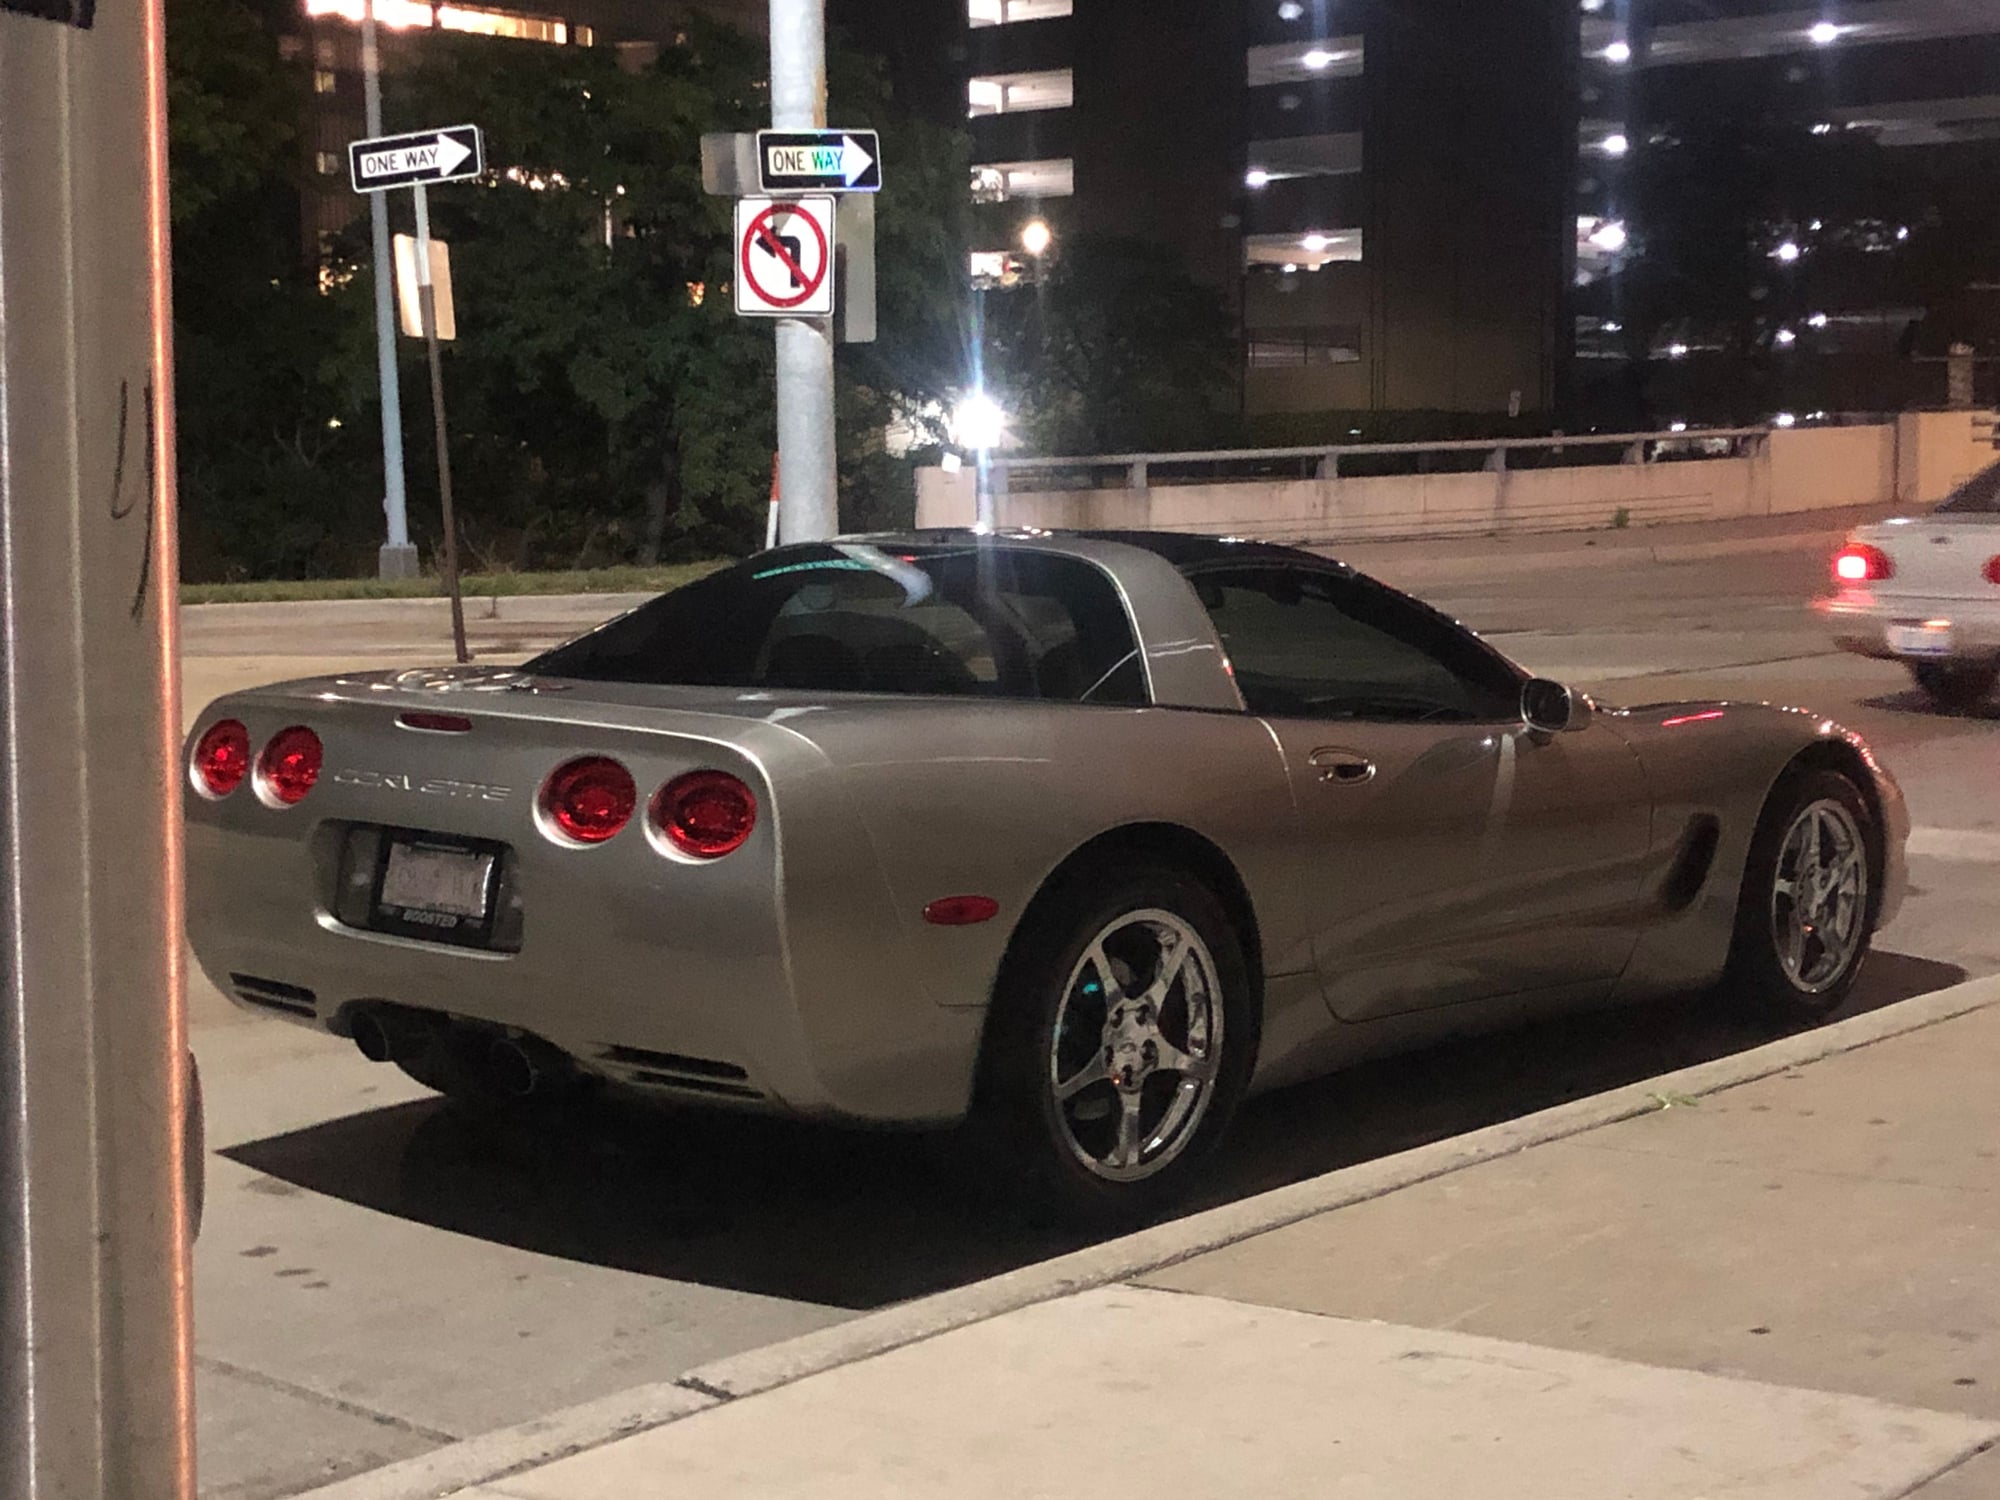 1999 Chevrolet Corvette - 99 c5 z51 - Used - VIN 1g1yy22g8x5124878 - 103,000 Miles - 8 cyl - 2WD - Automatic - Coupe - Gray - Westland, MI 48187, United States